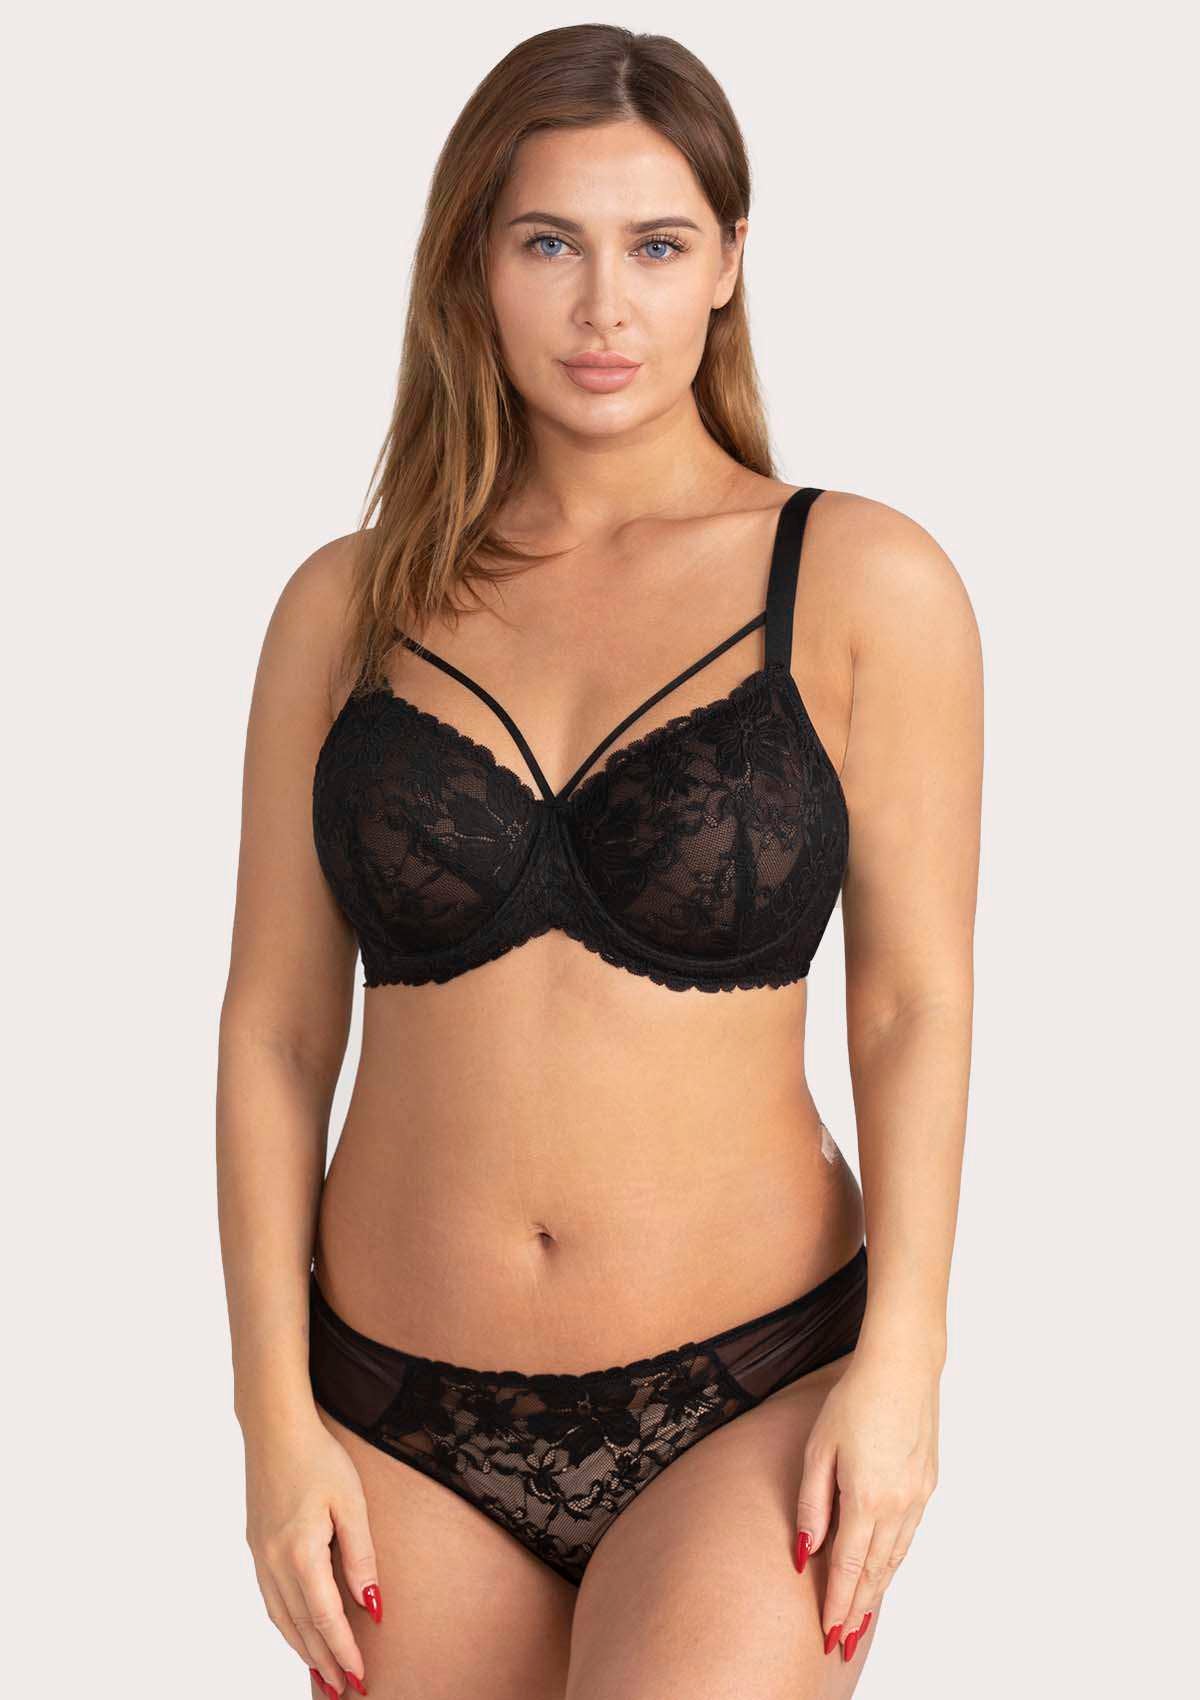 HSIA Pretty In Petals Lace Bra And Panty Set: Non Padded Wired Bra - Black / 46 / C